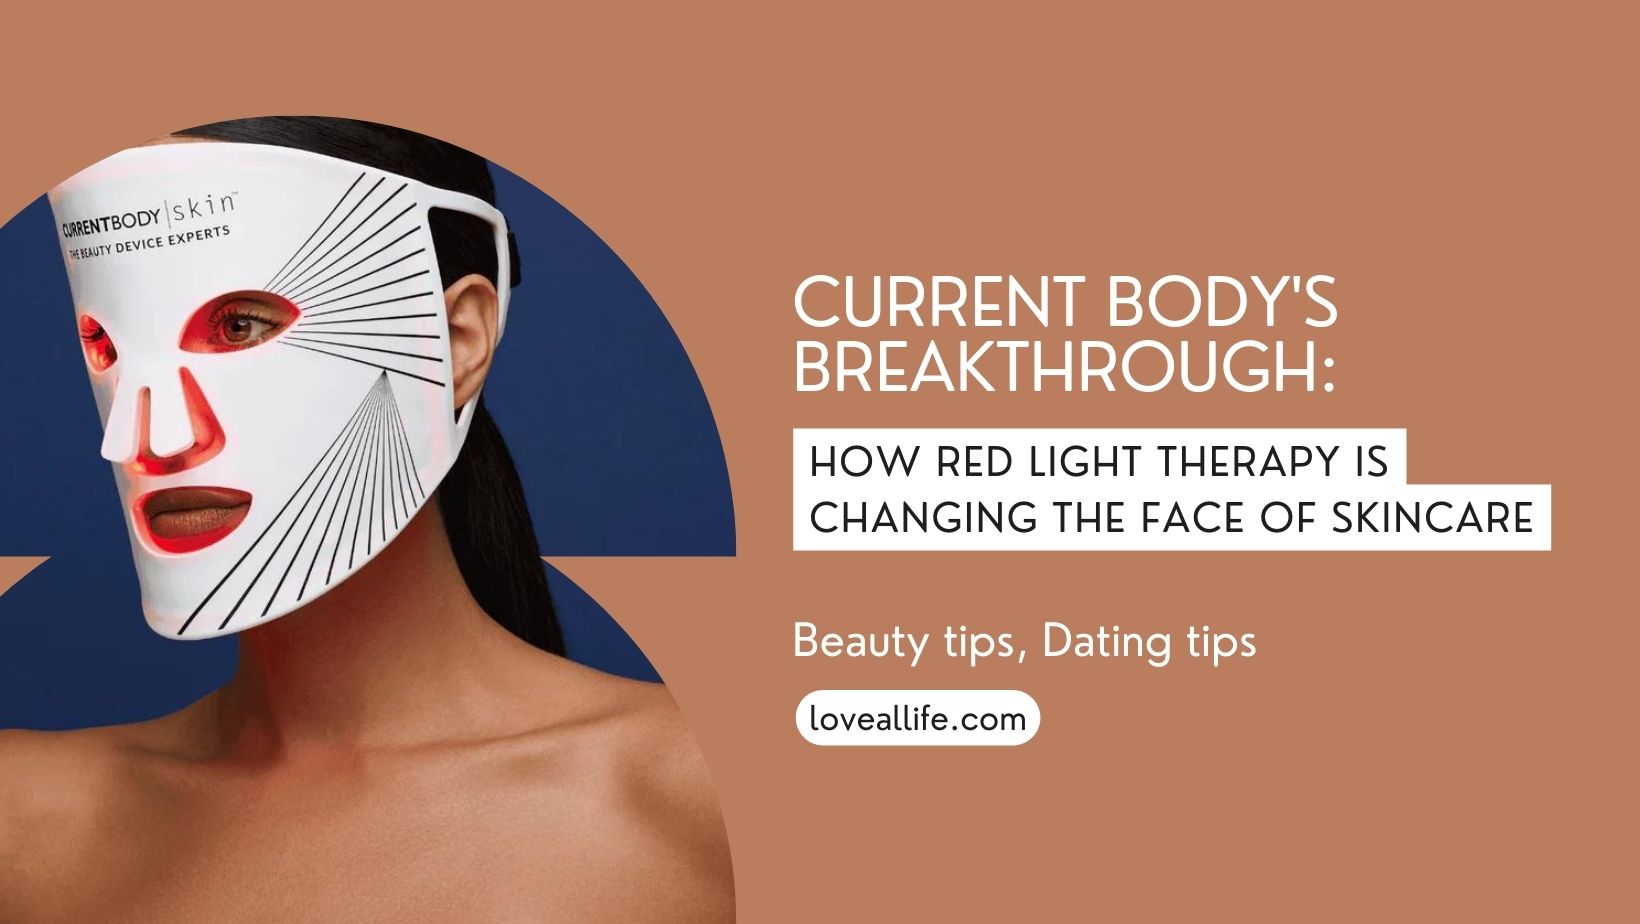 How Red Light Therapy is Changing the Face of Skincare